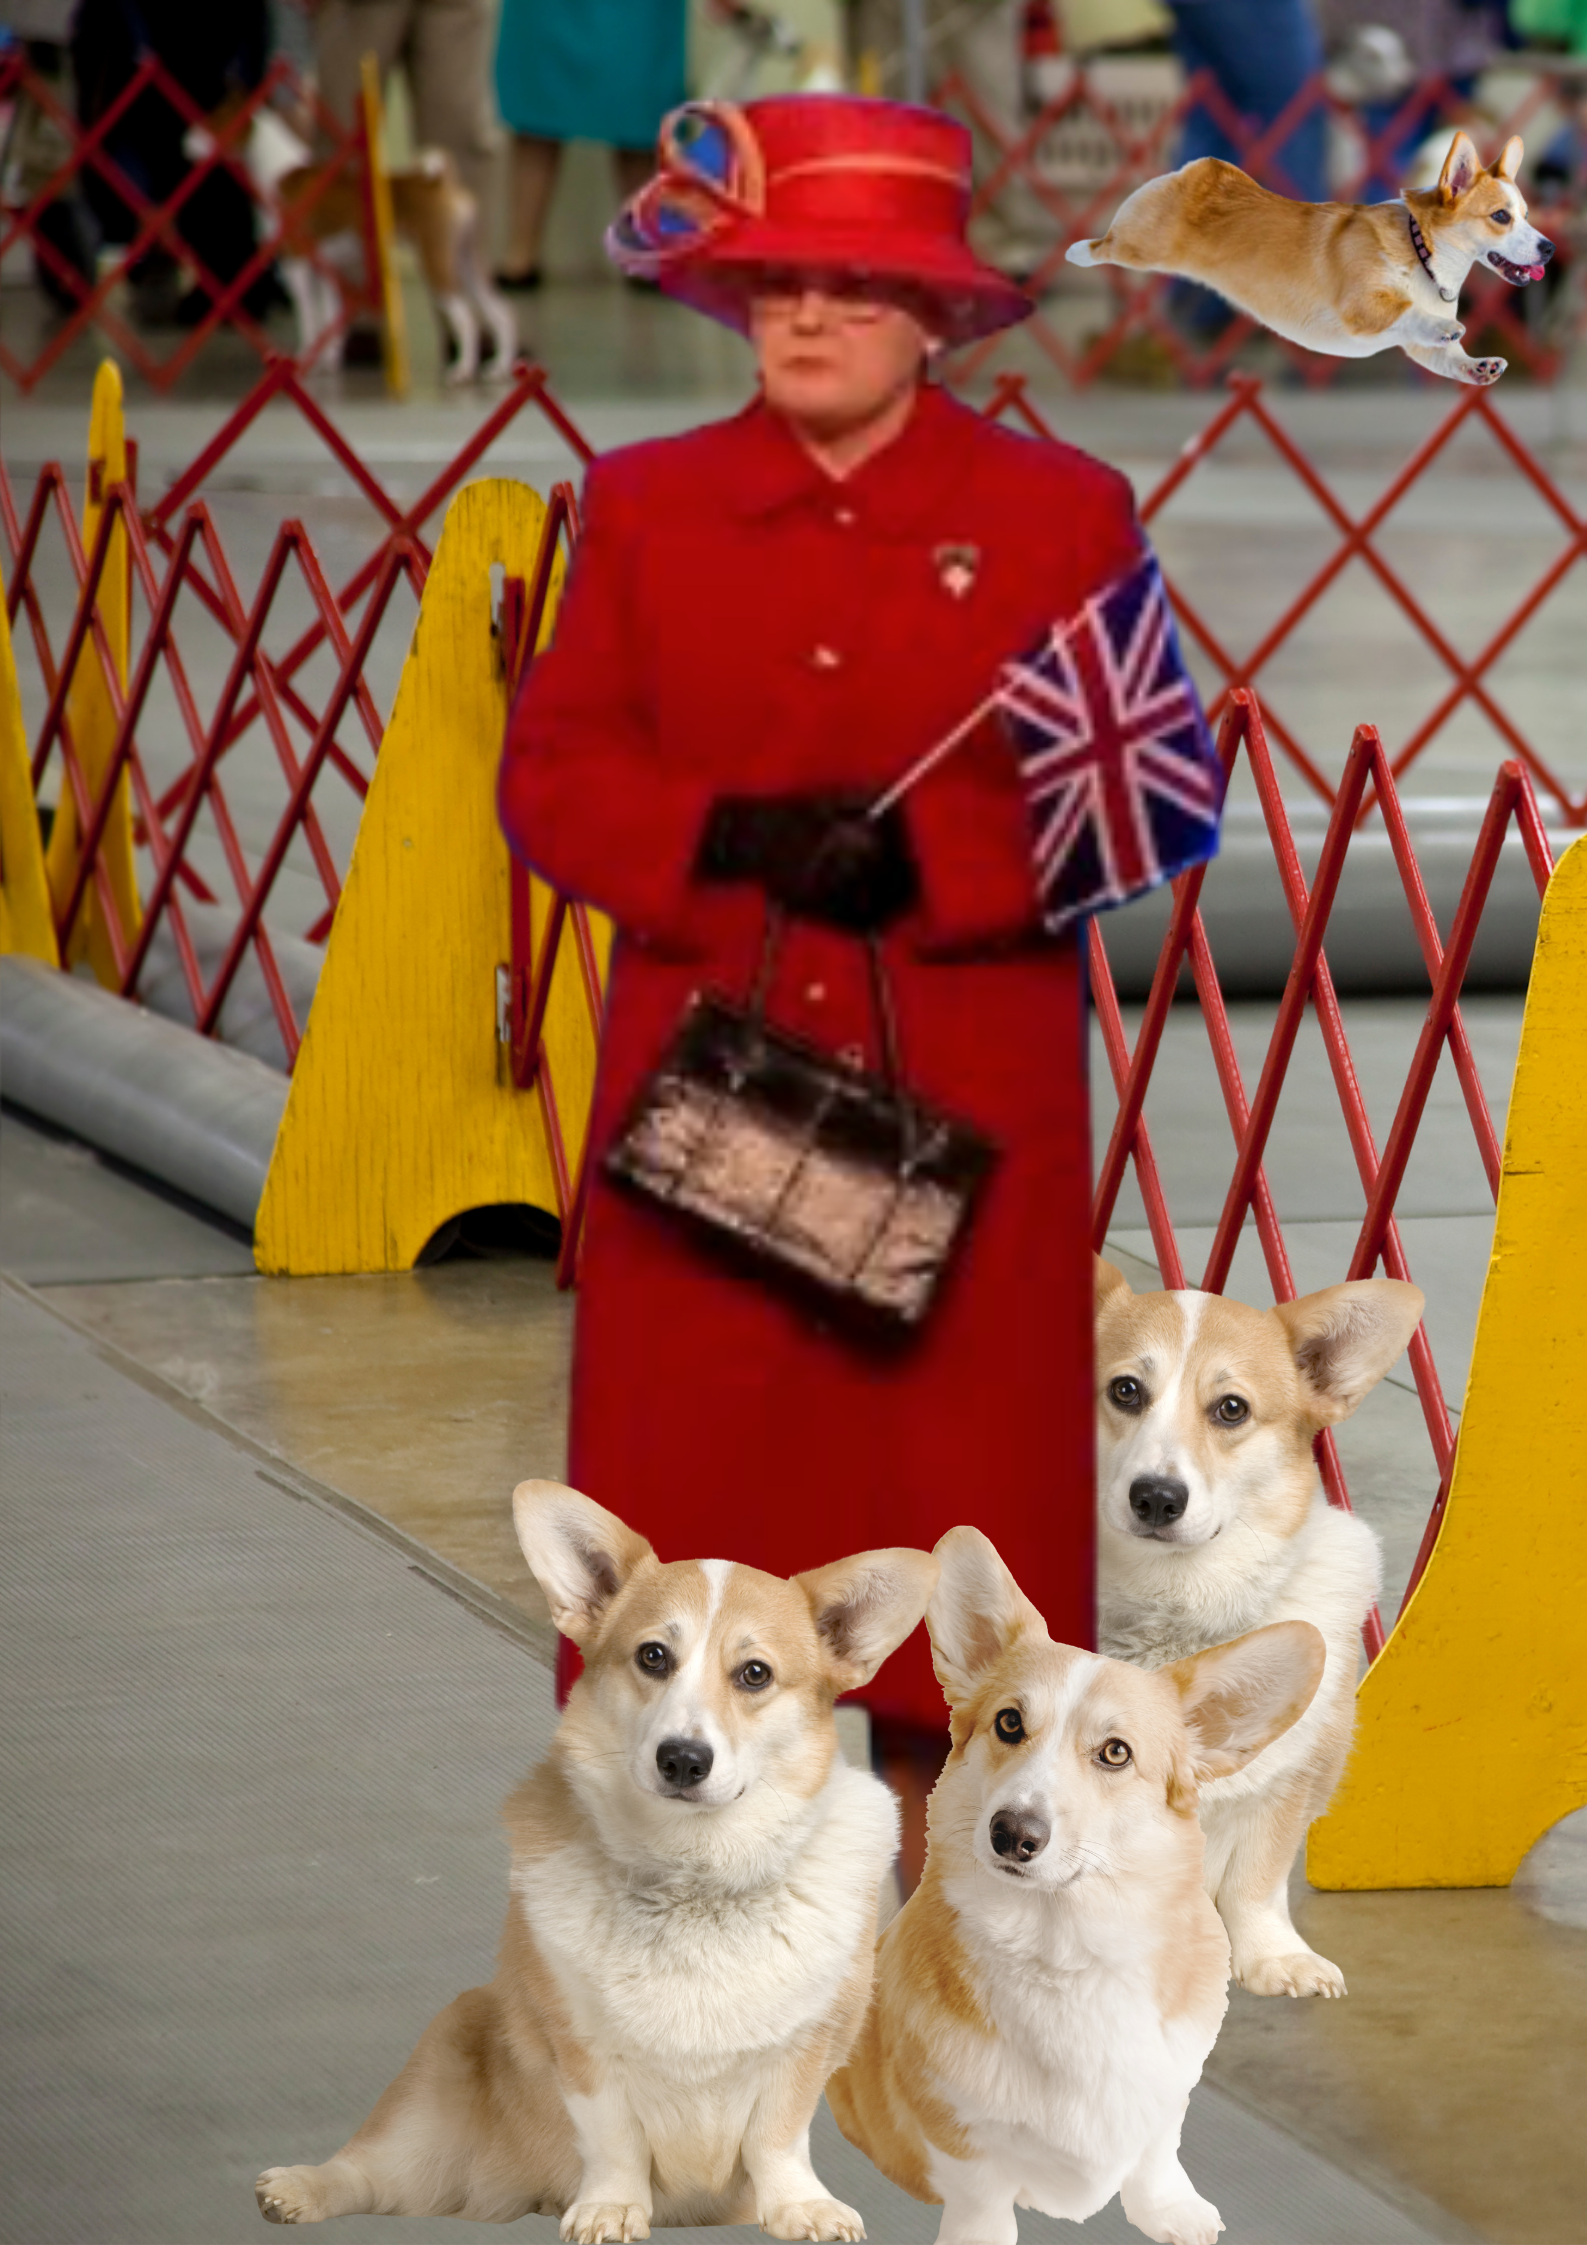 Rare Species as the Queen and her corgis